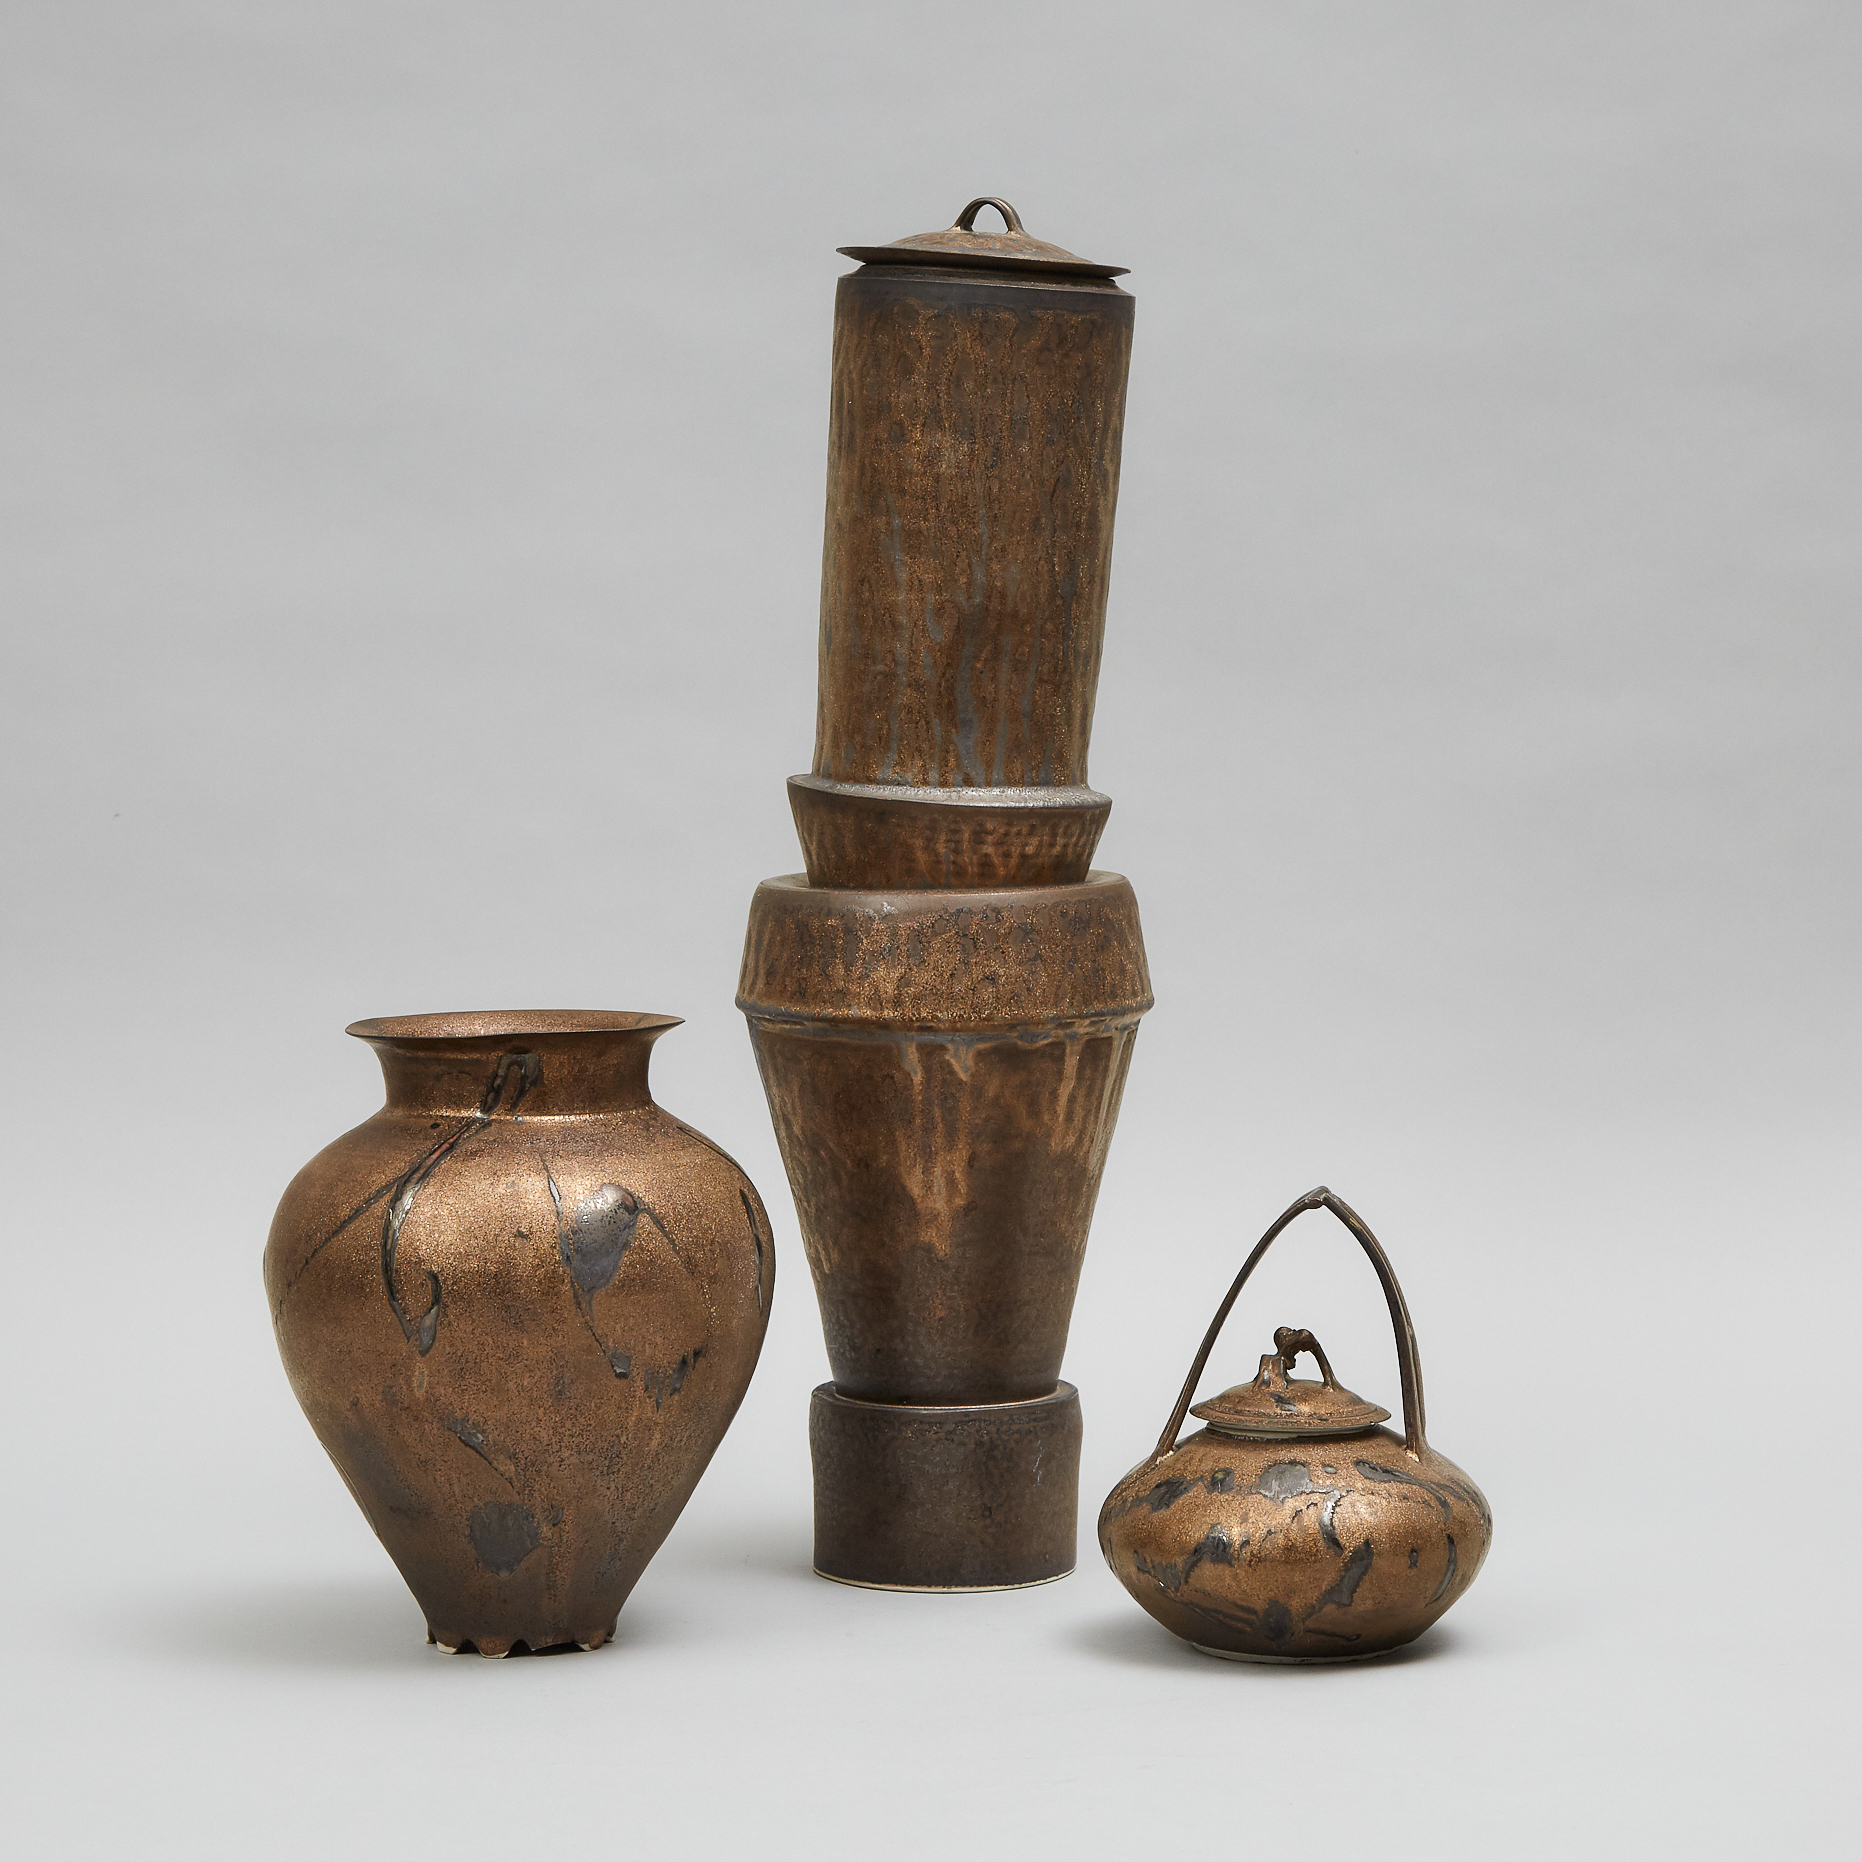 Kayo O'Young (Canadian, b.1950), Two Bronze Glazed Vases and a Covered Jar, 1994/2003